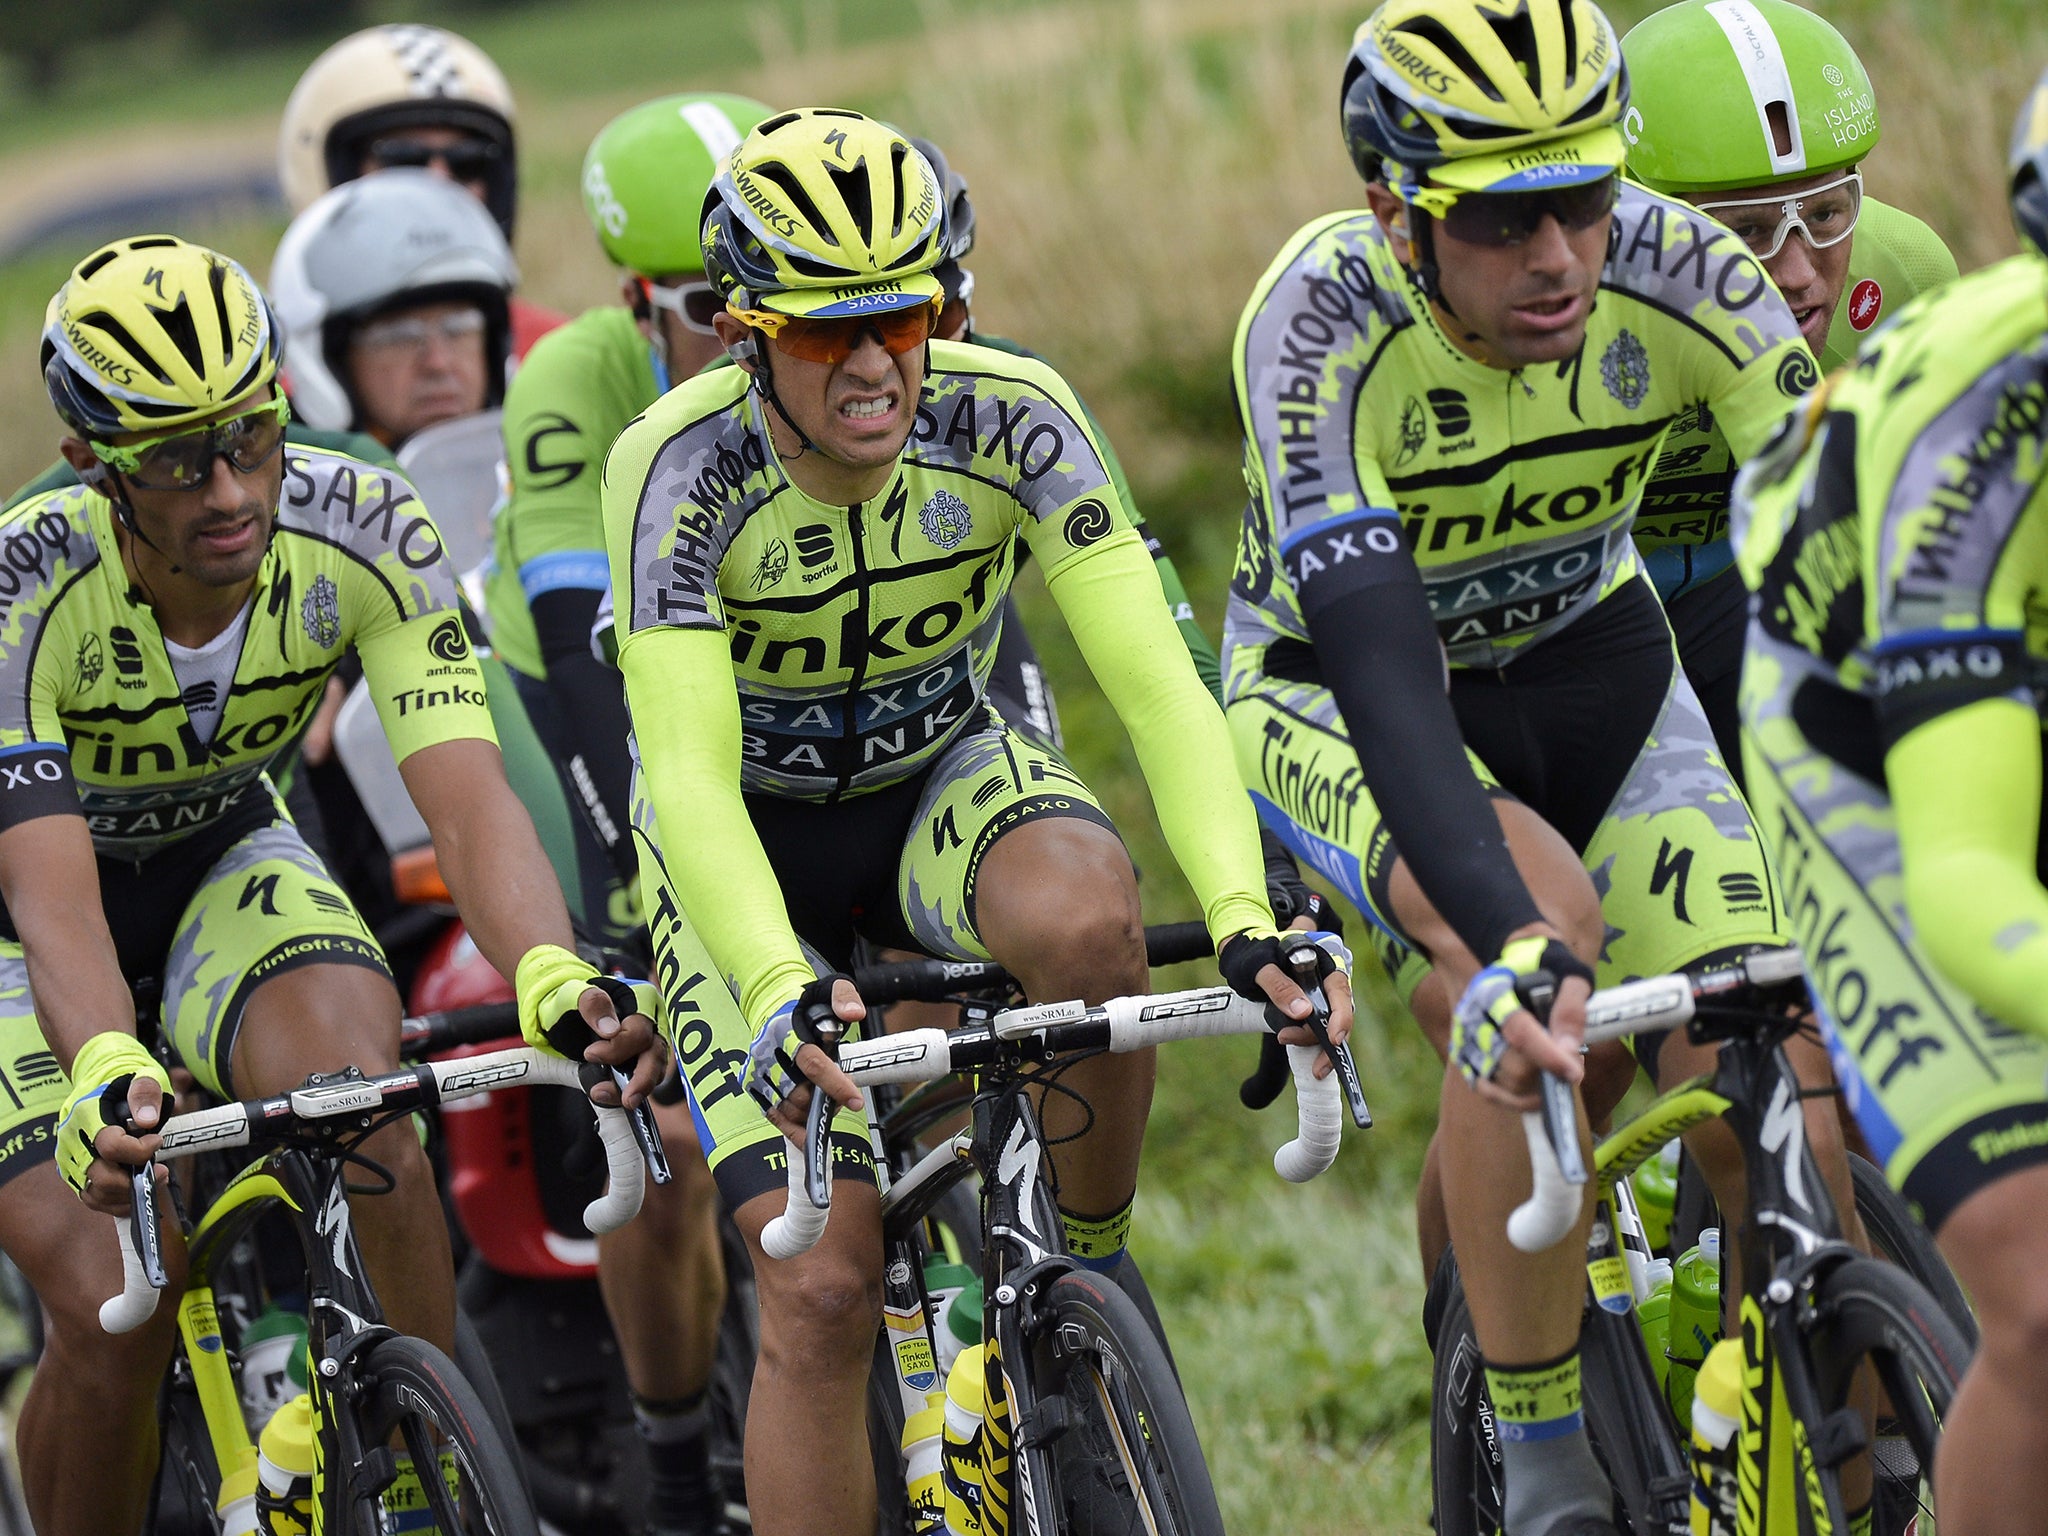 Alberto Contador's Tinkoff-Saxo will be one of the favourites for the team time-trial